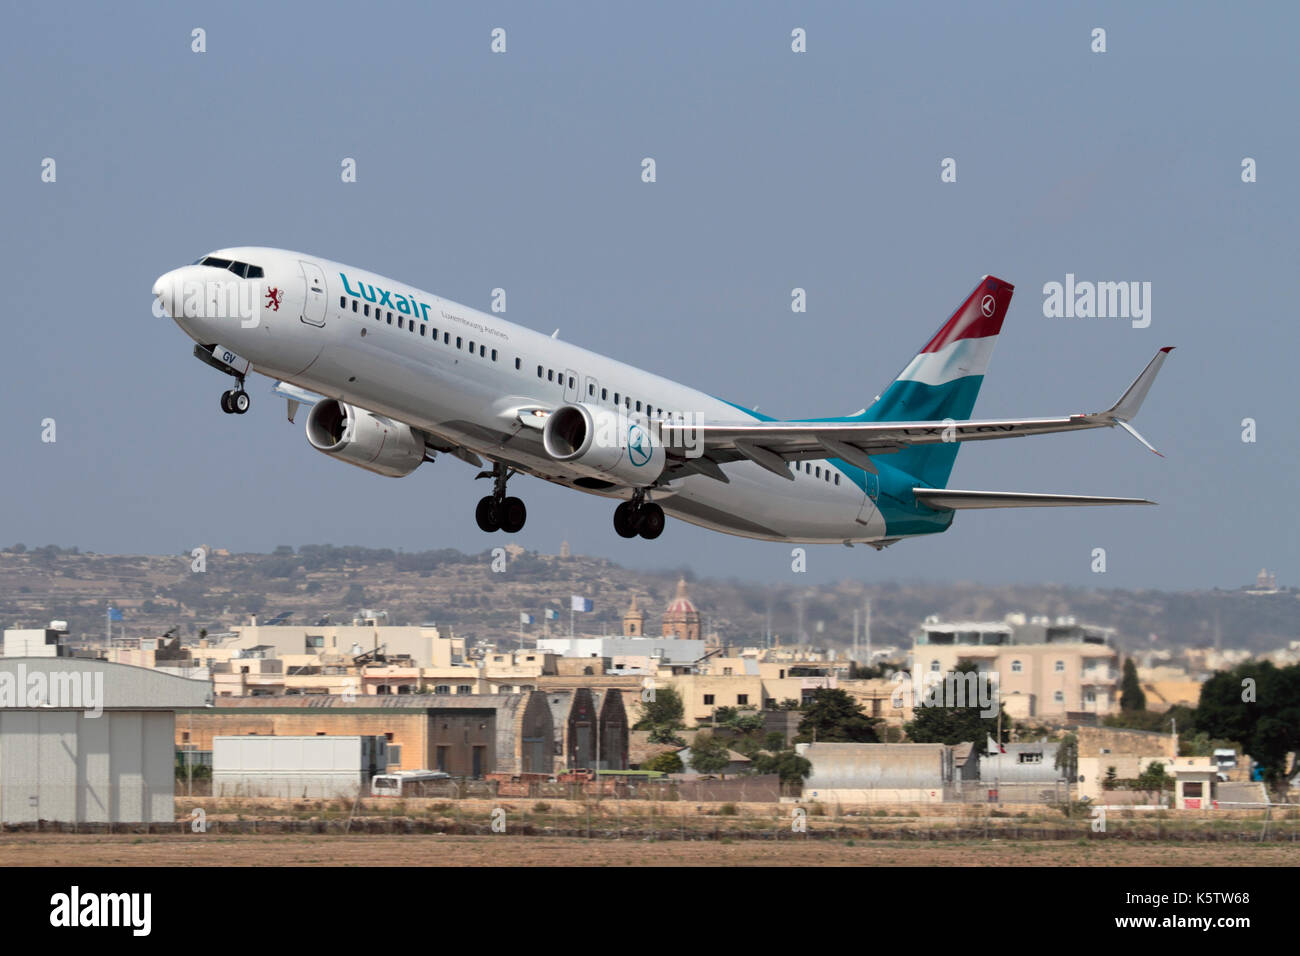 Civil aviation in the EU. Luxair Luxembourg Airlines Boeing 737-800 jet plane taking off from Malta Stock Photo